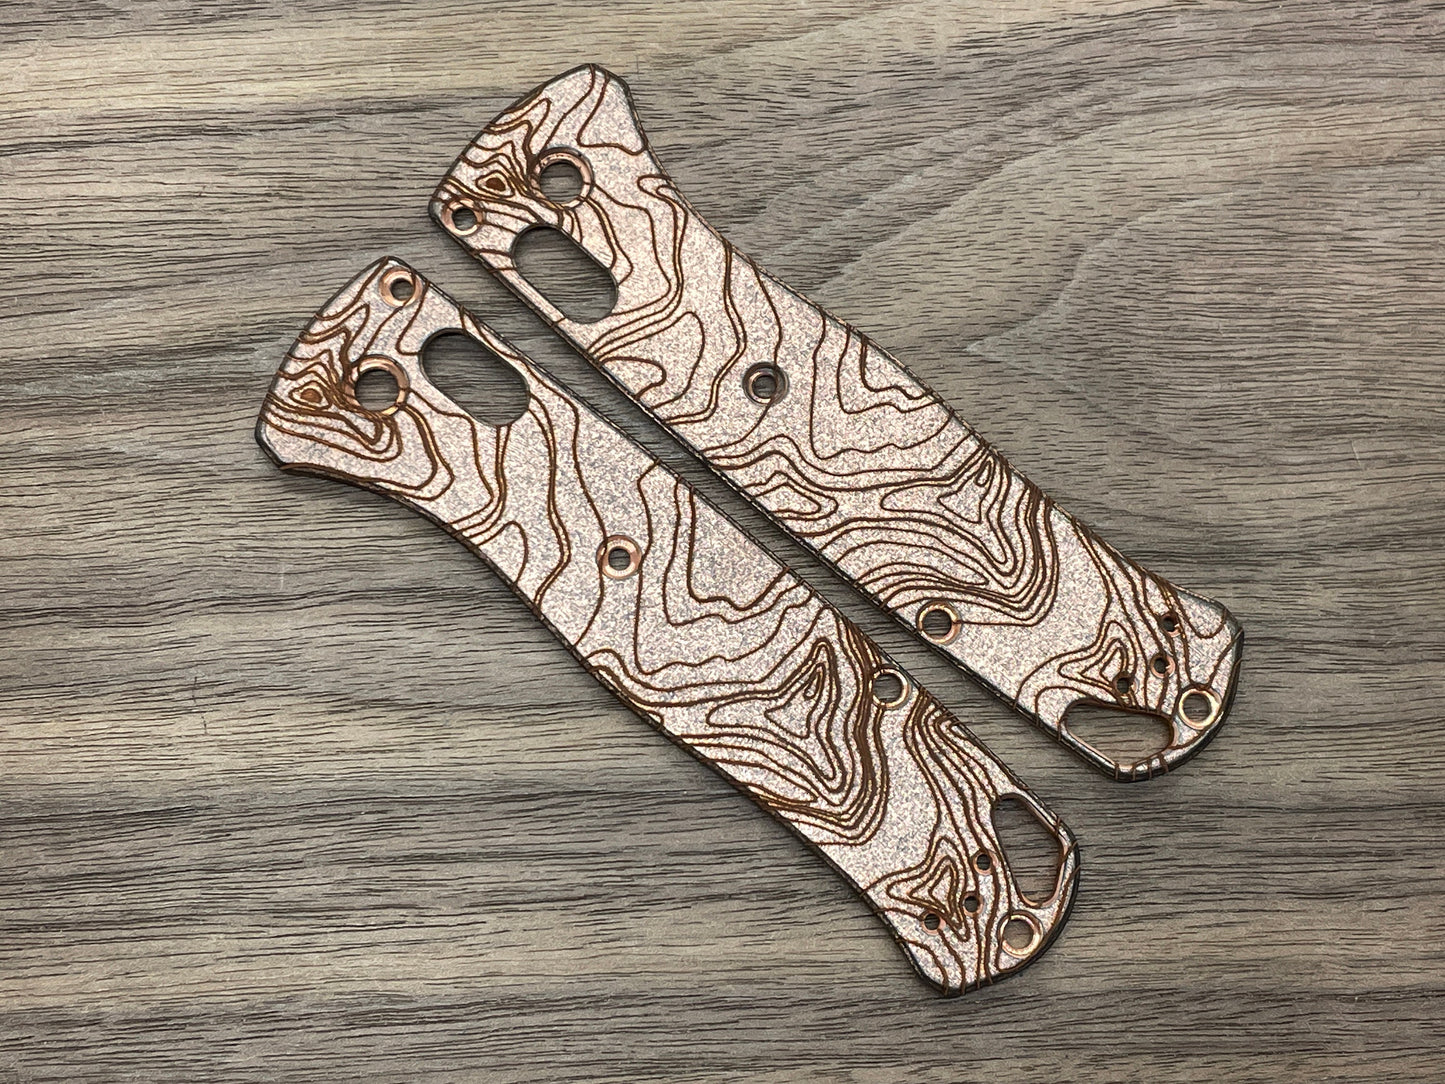 Battleworn COPPER Topo engraved Scales for Benchmade Bugout 535